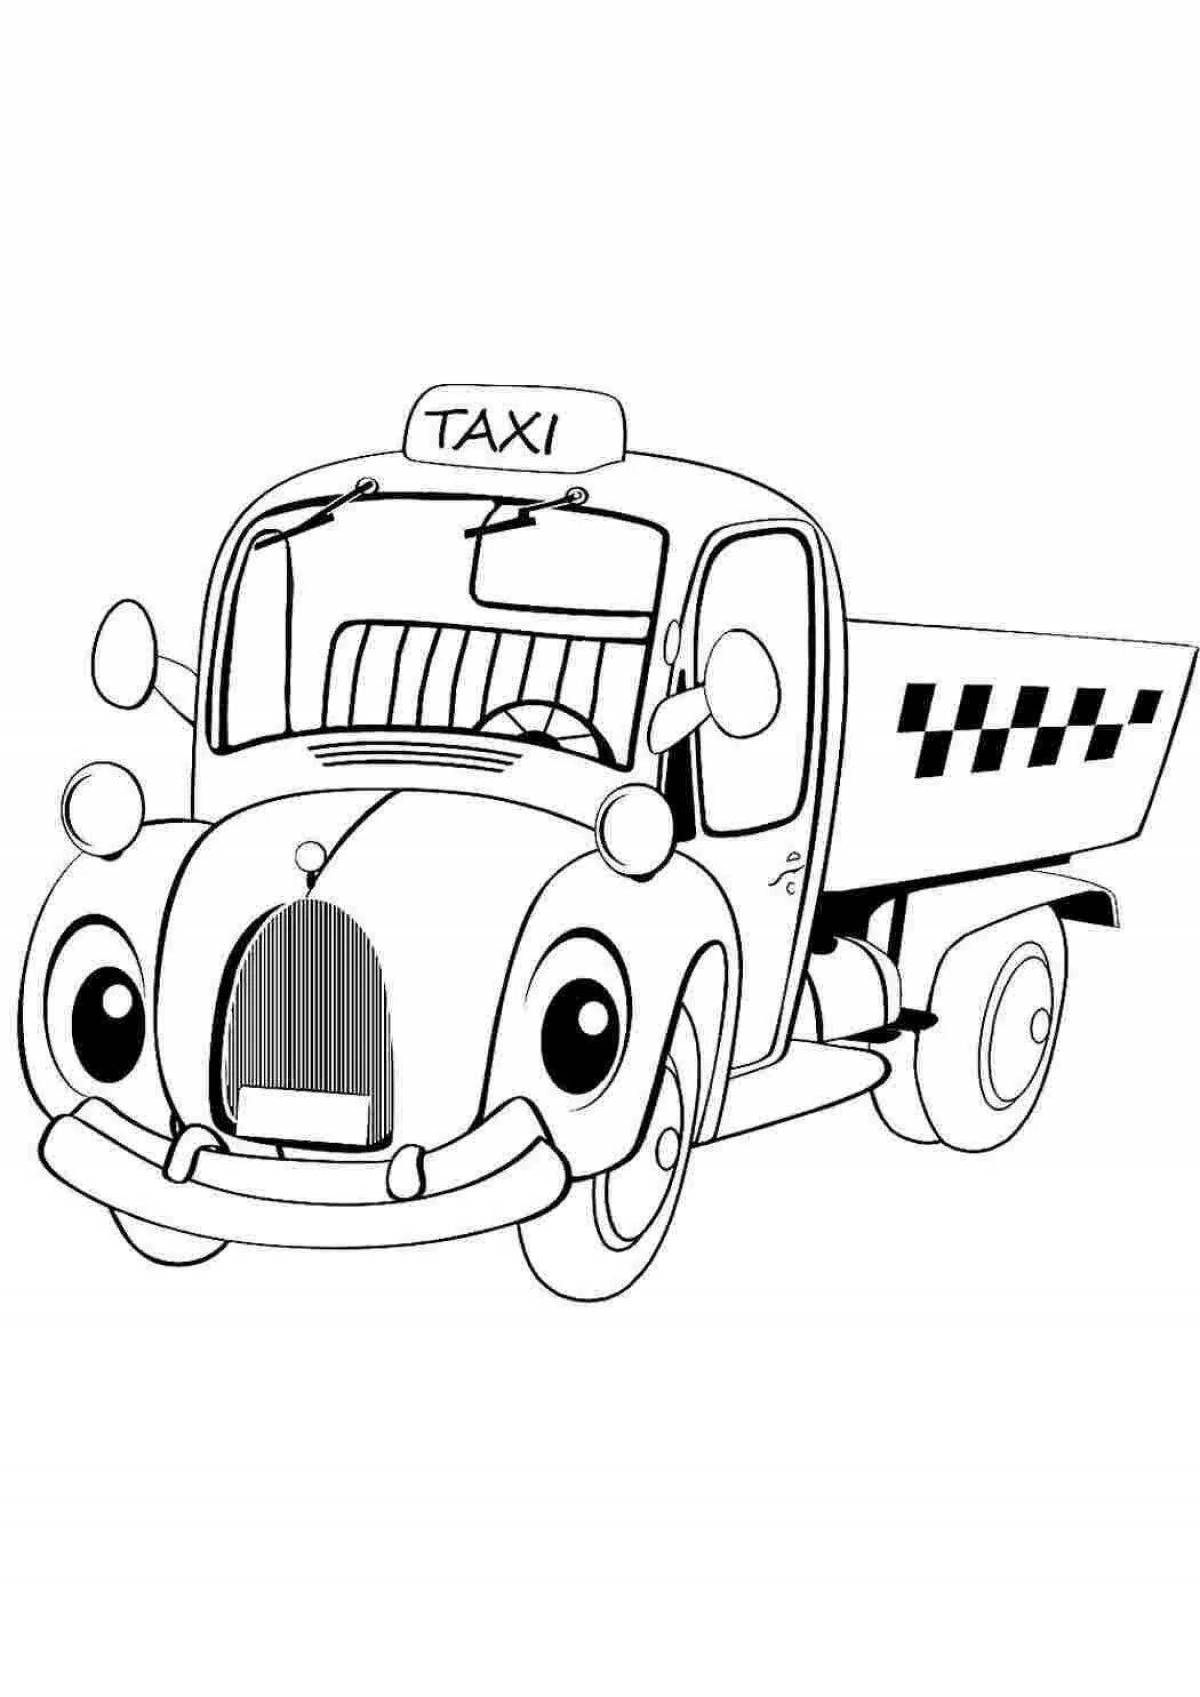 Amazing taxi car coloring page